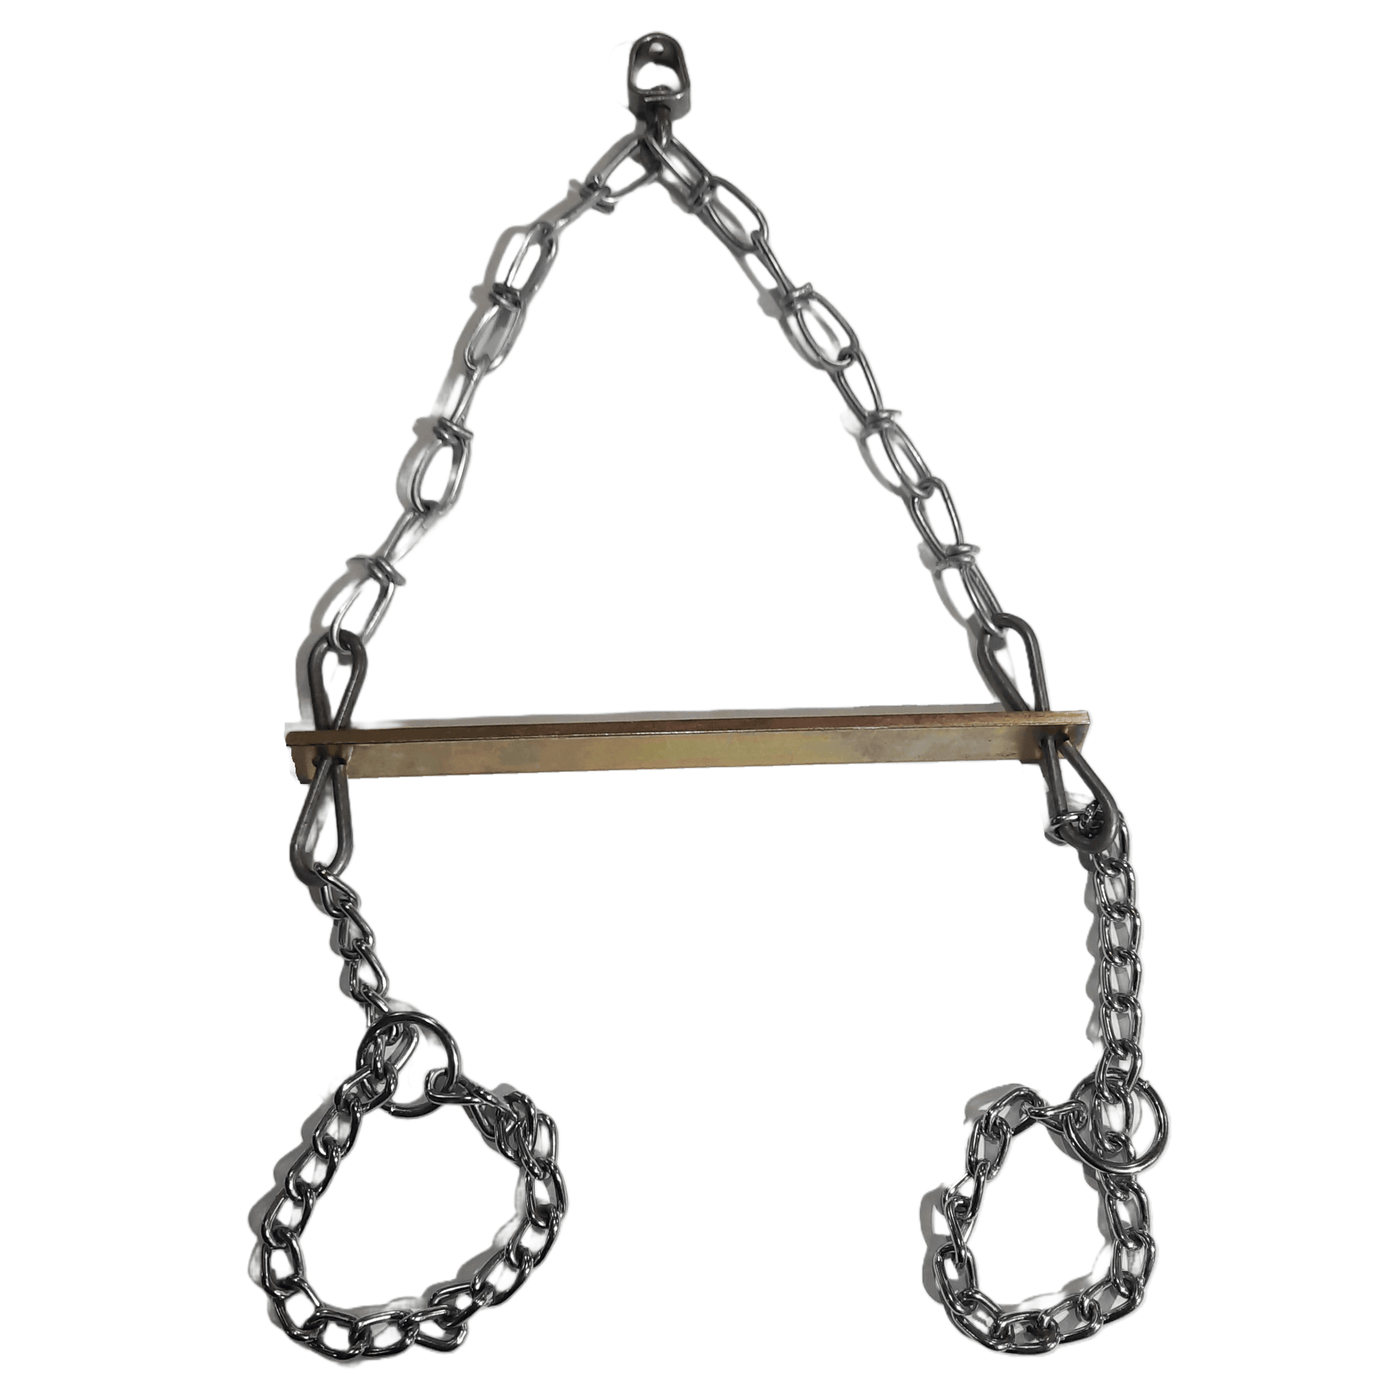 Winkler's Chain Skinning Gambrel - Trapping Supplies